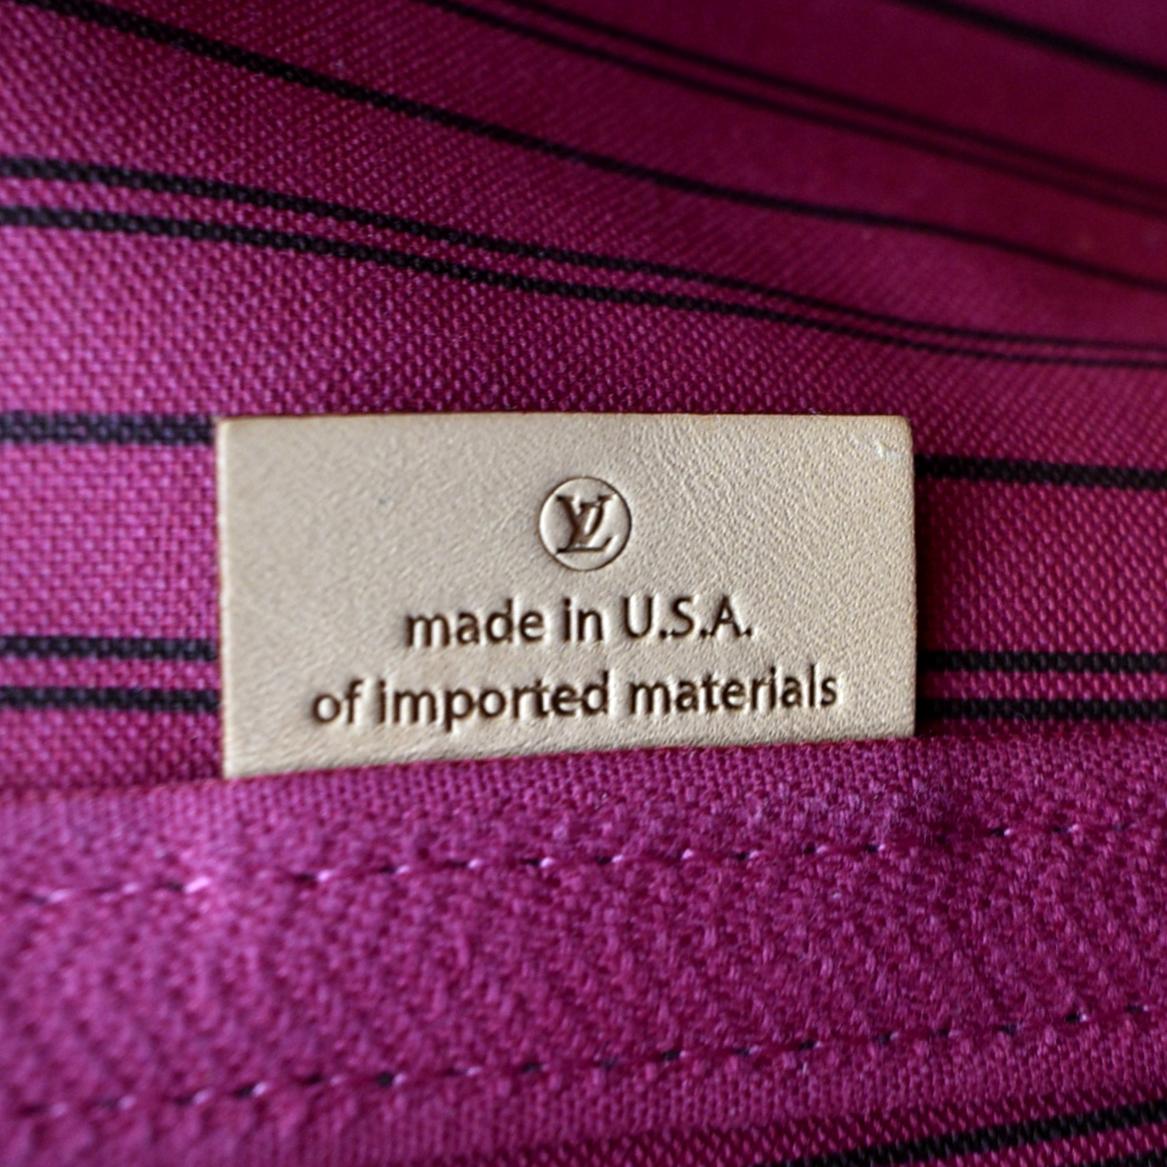 lv made in usa